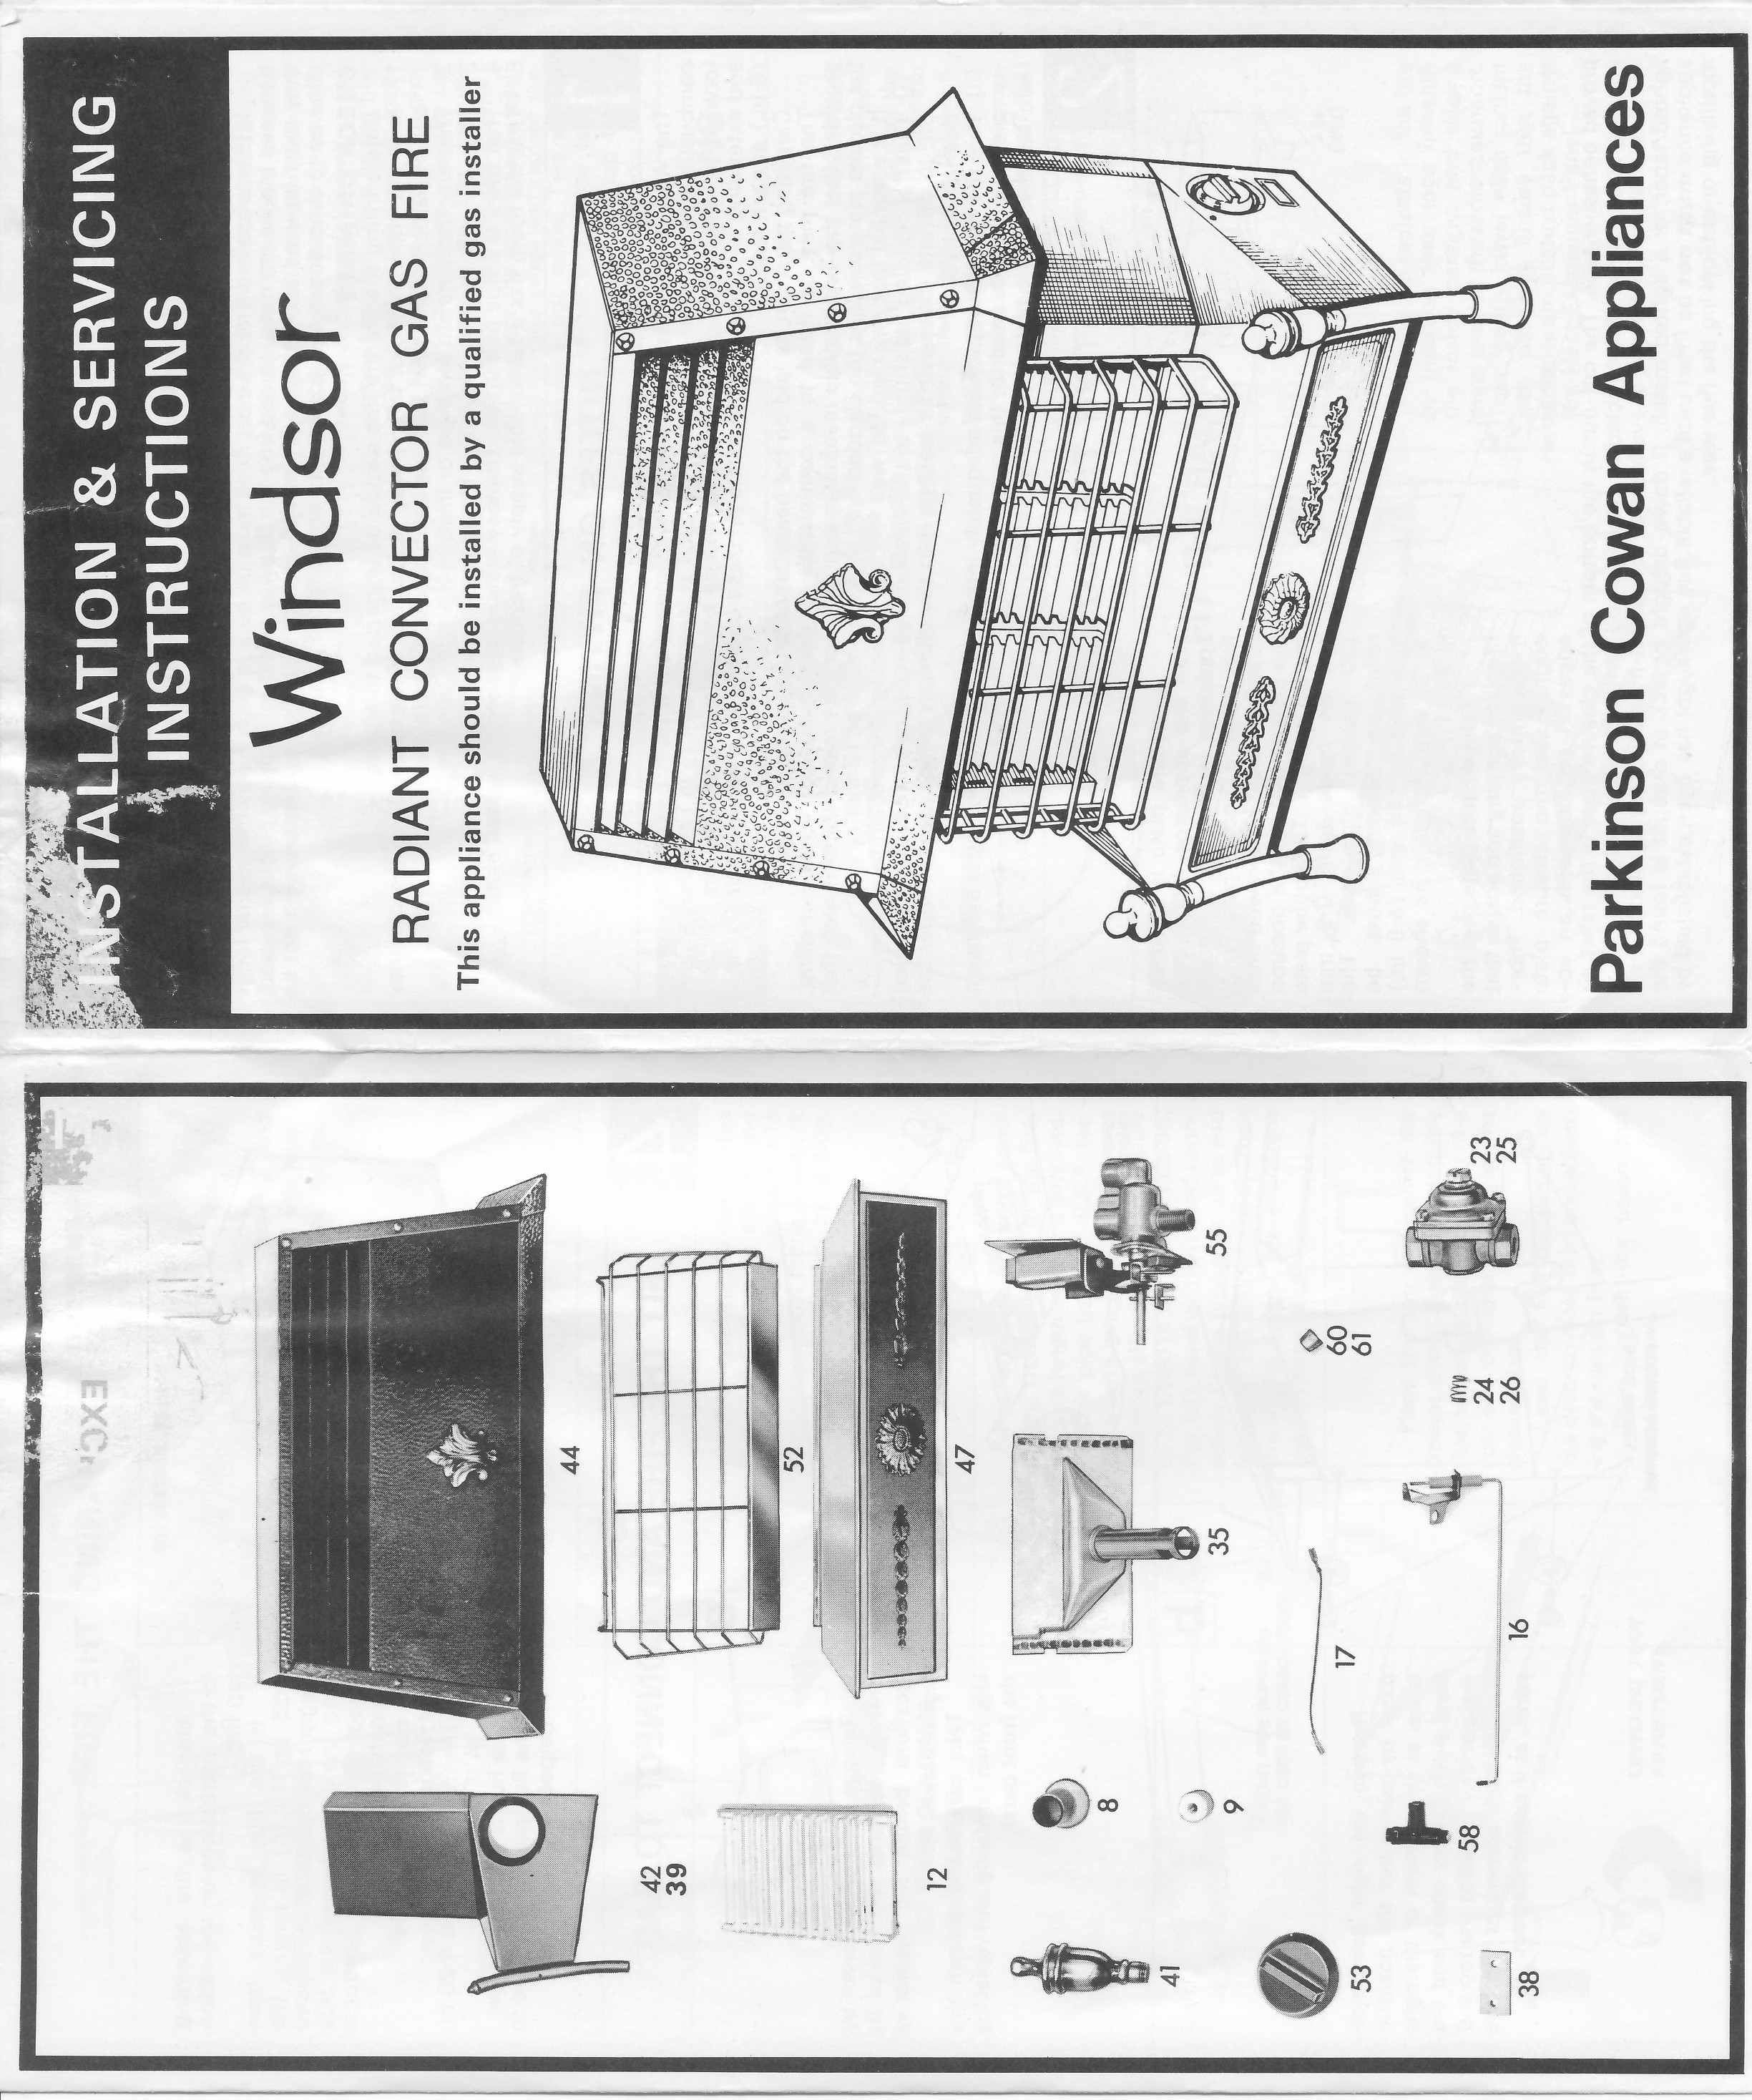 Image for Installation manual for Parkinson Cowan Widsor Radiant Gas Fire, circa 1972 